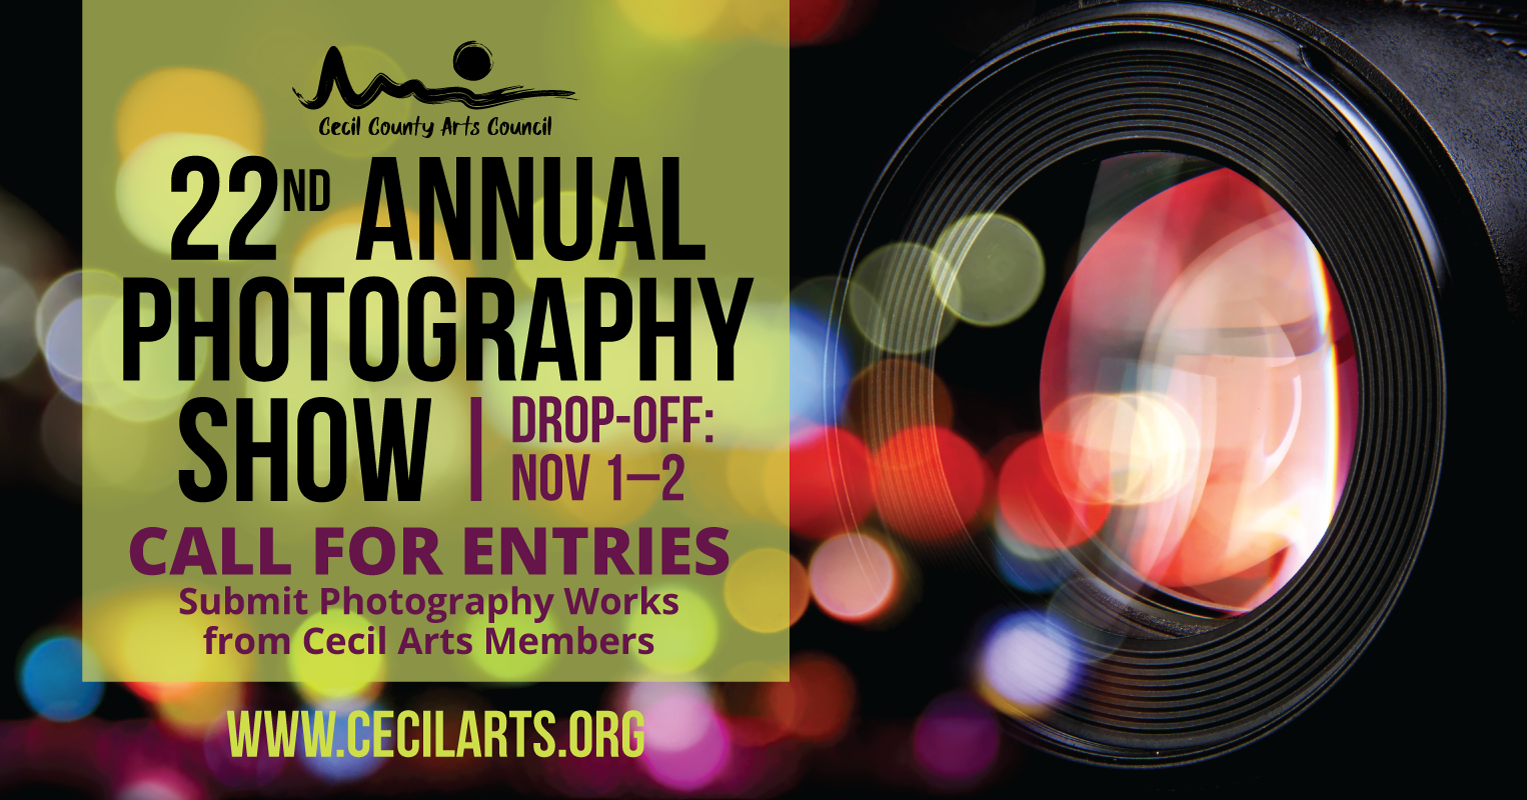 22nd Annual Photography Show - Cecil County Arts Council - Maryland Art